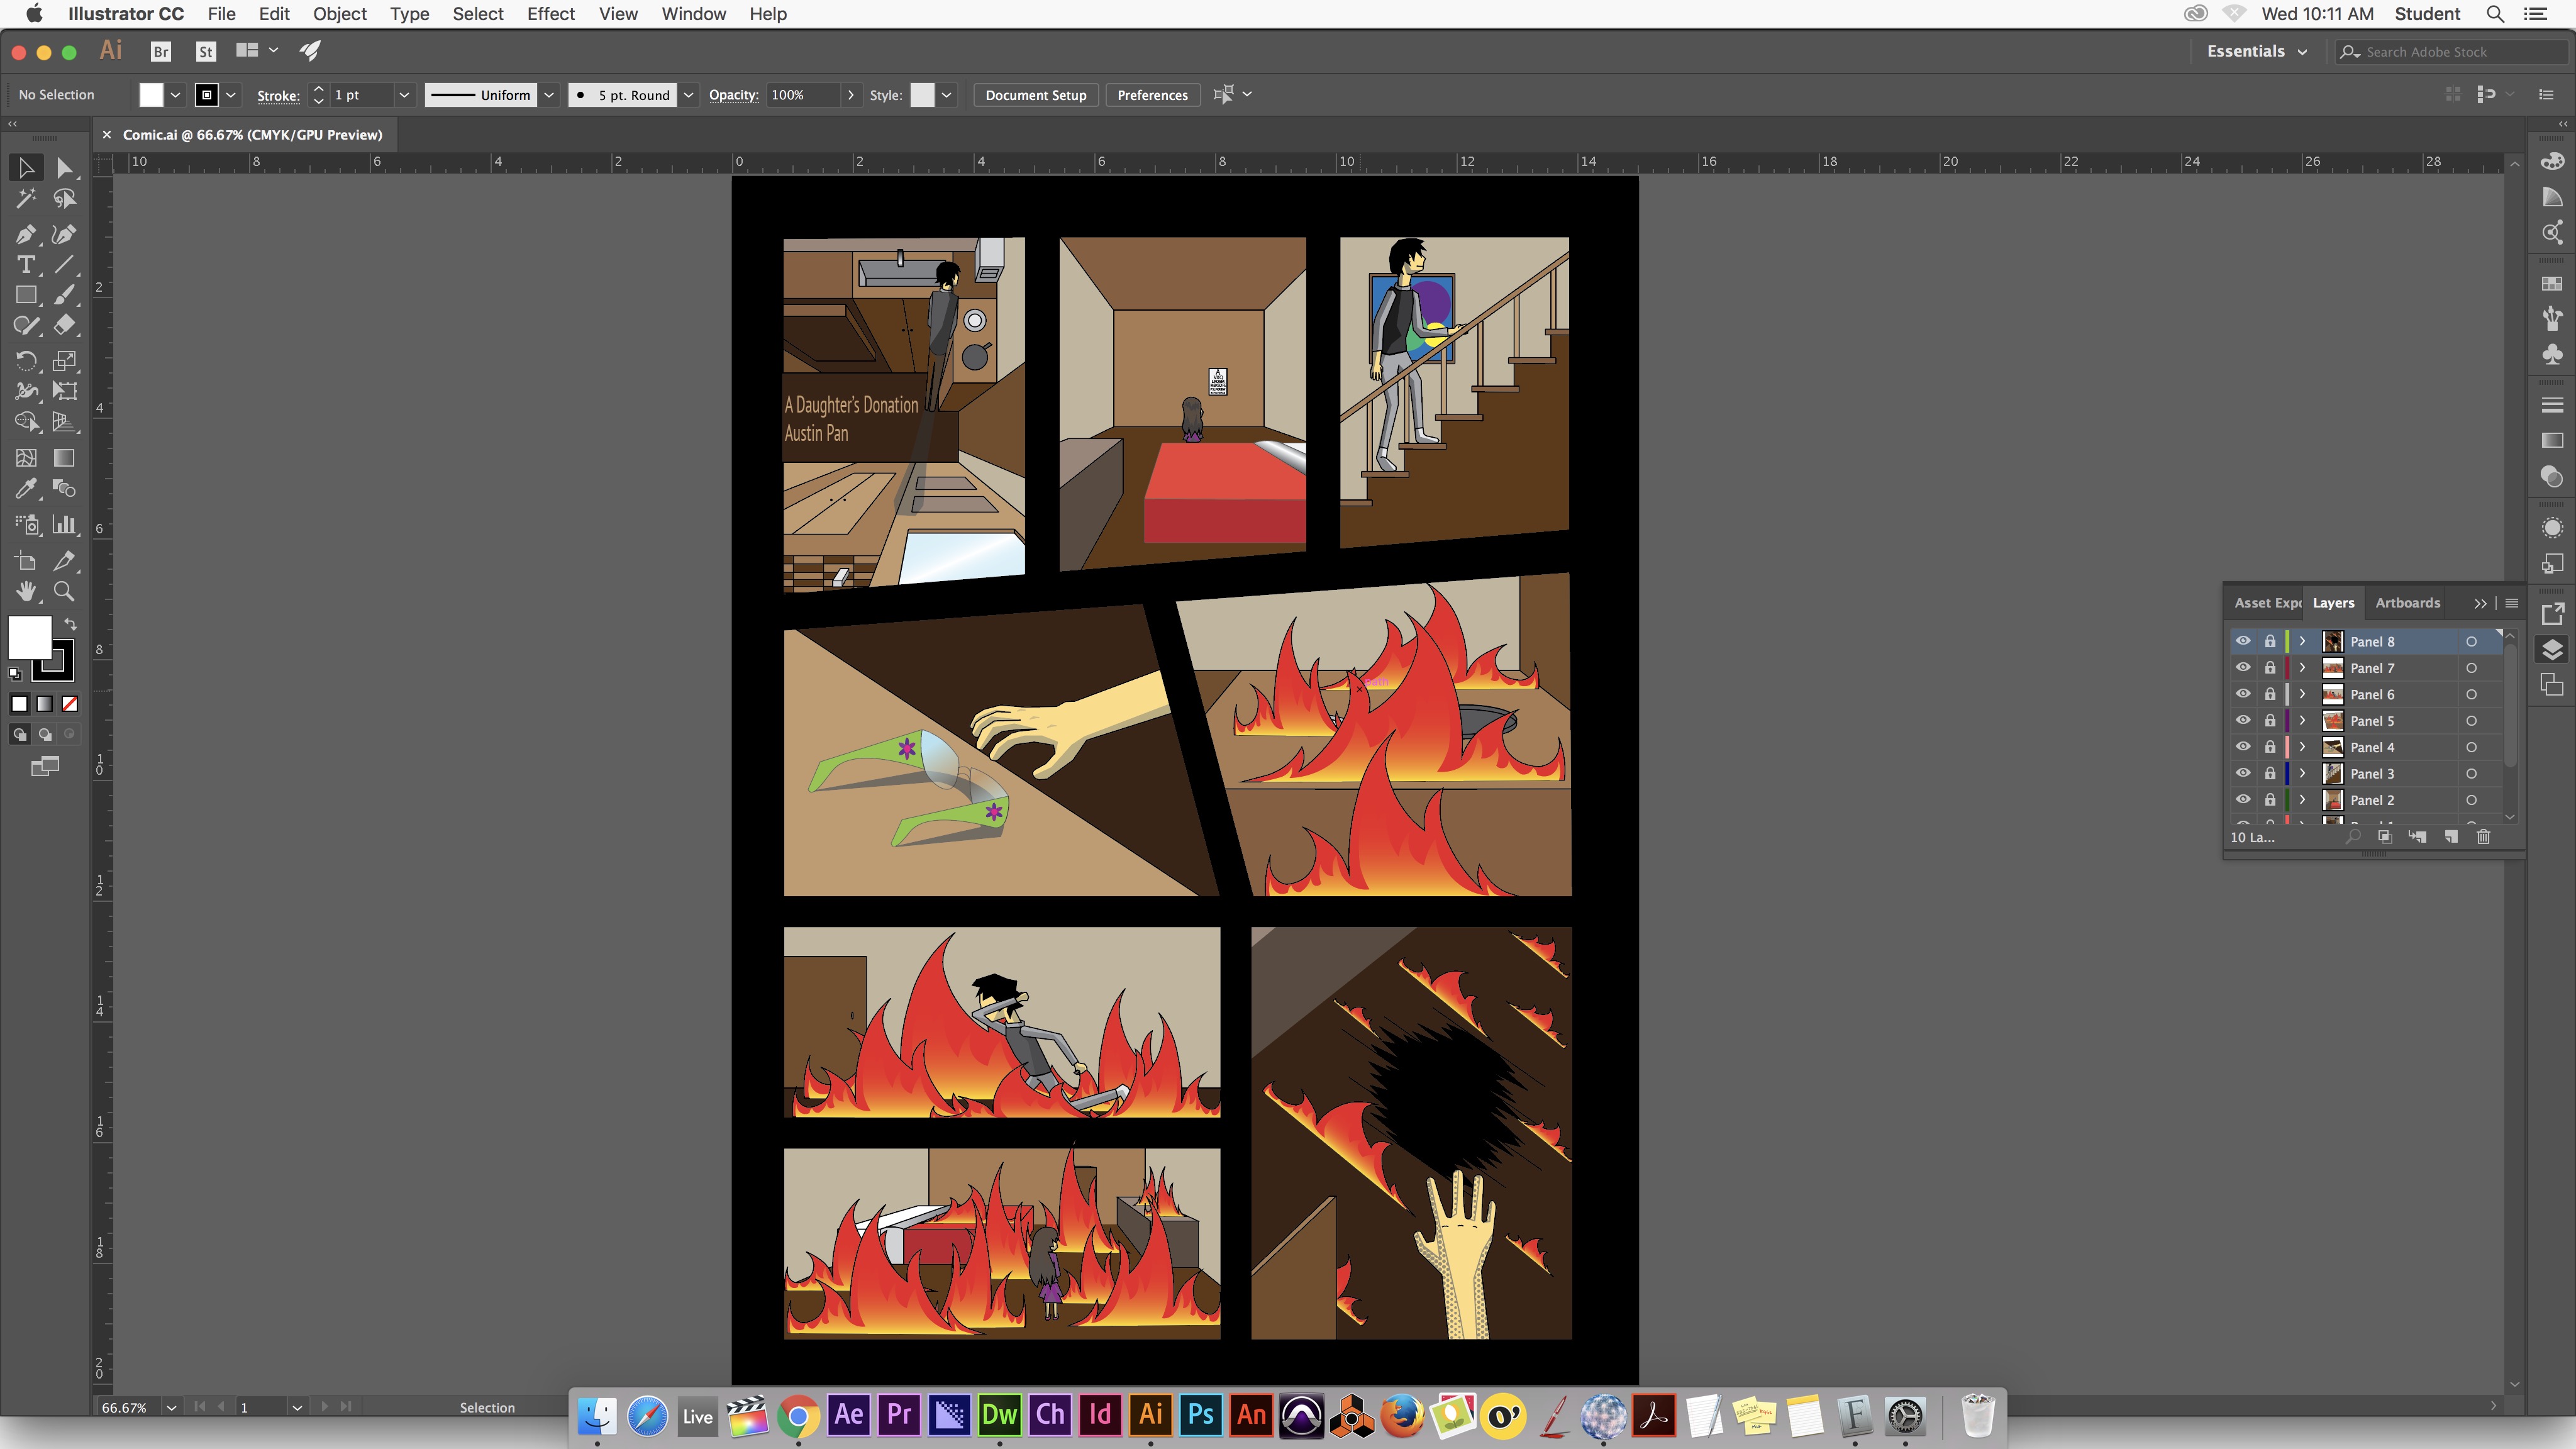 This is a screen shot of my comic illustration workspace